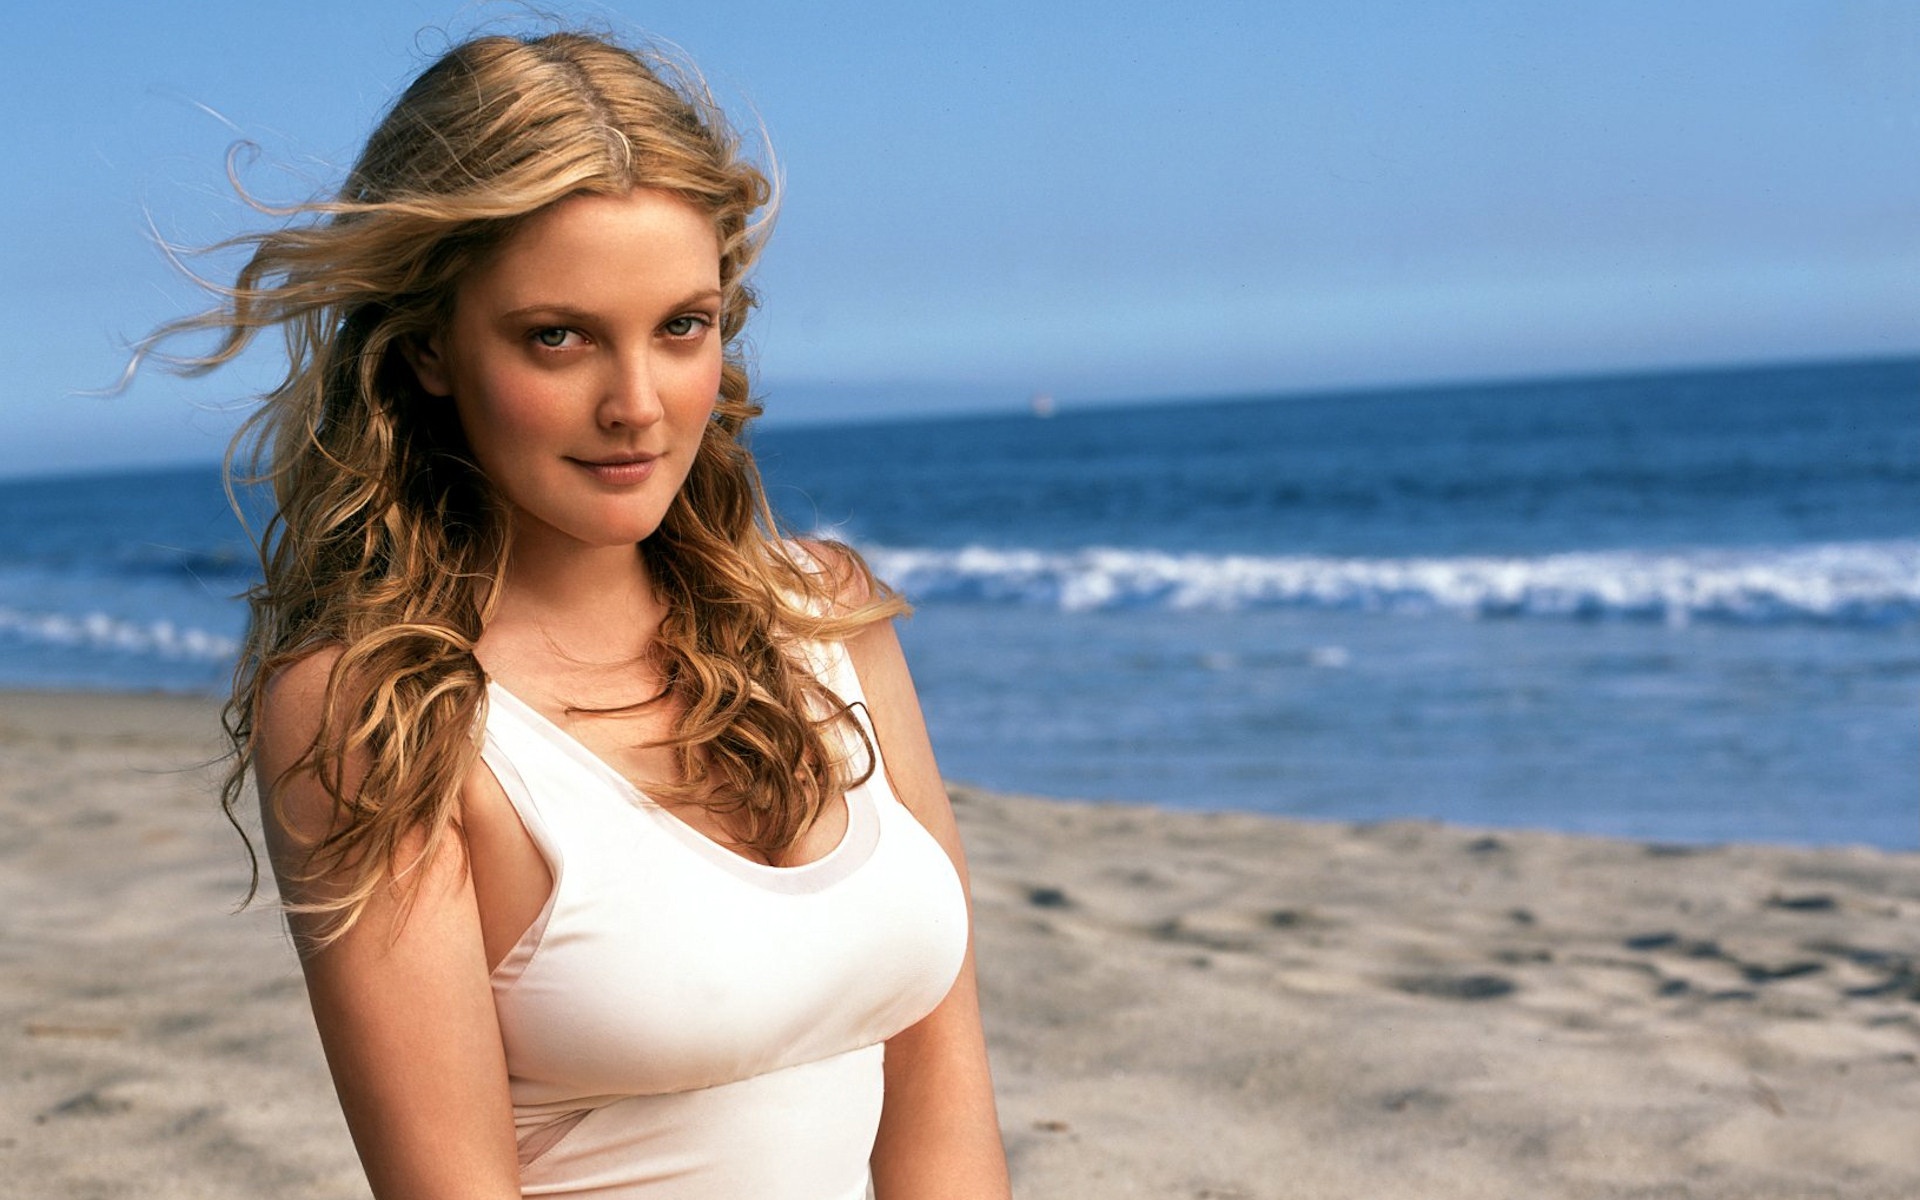 Drew Barrymore smiling while on the beach